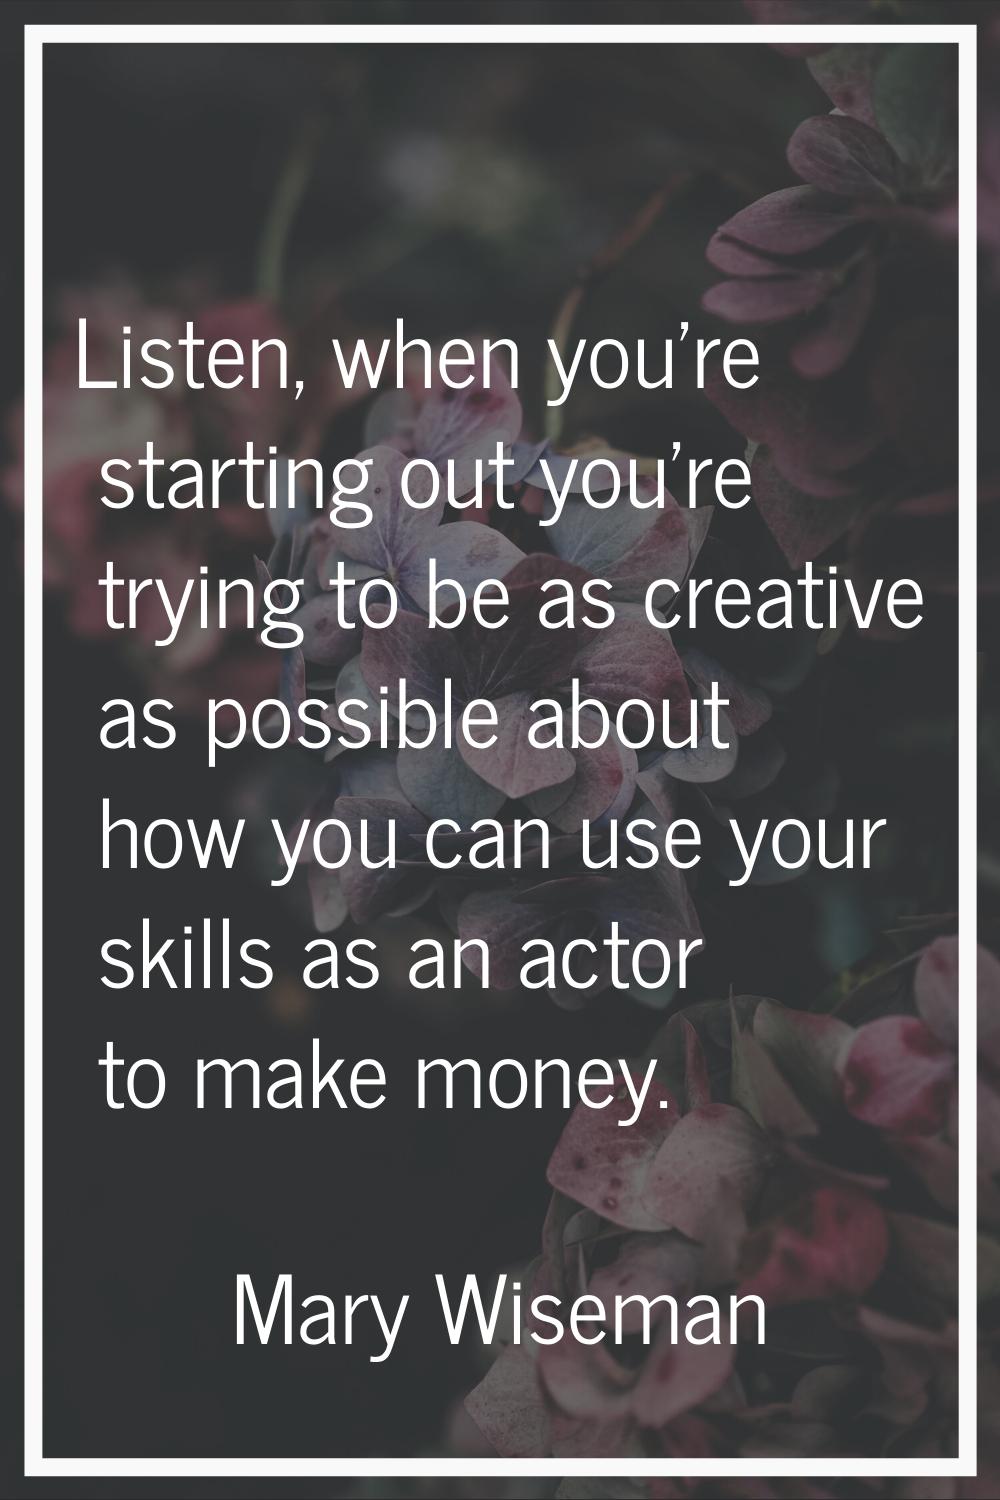 Listen, when you're starting out you're trying to be as creative as possible about how you can use 